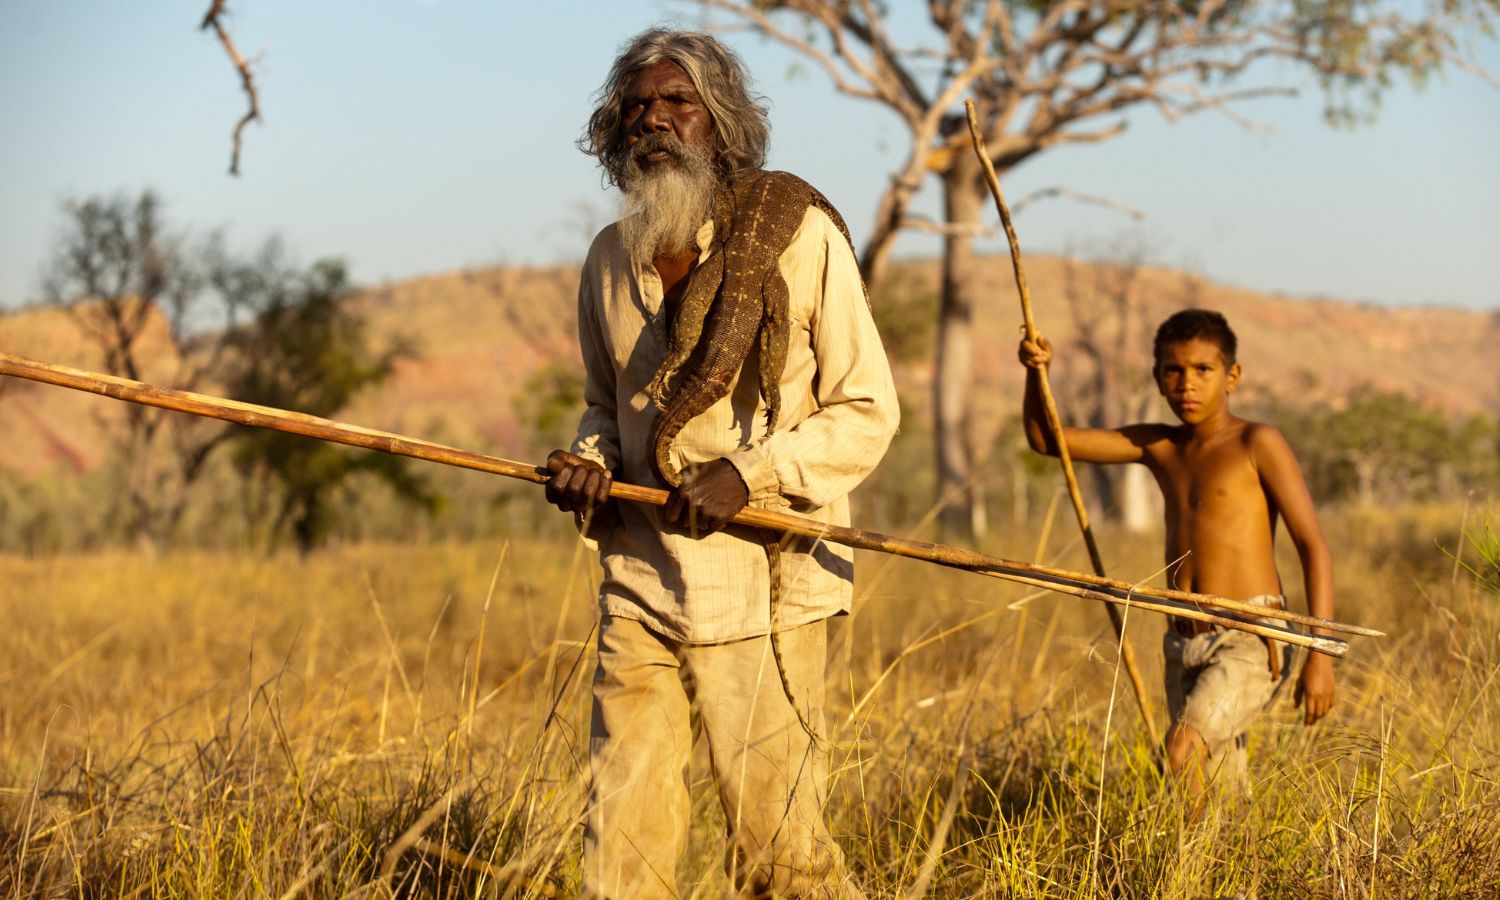 An image showing a scene from the indigenous film satellite boy 